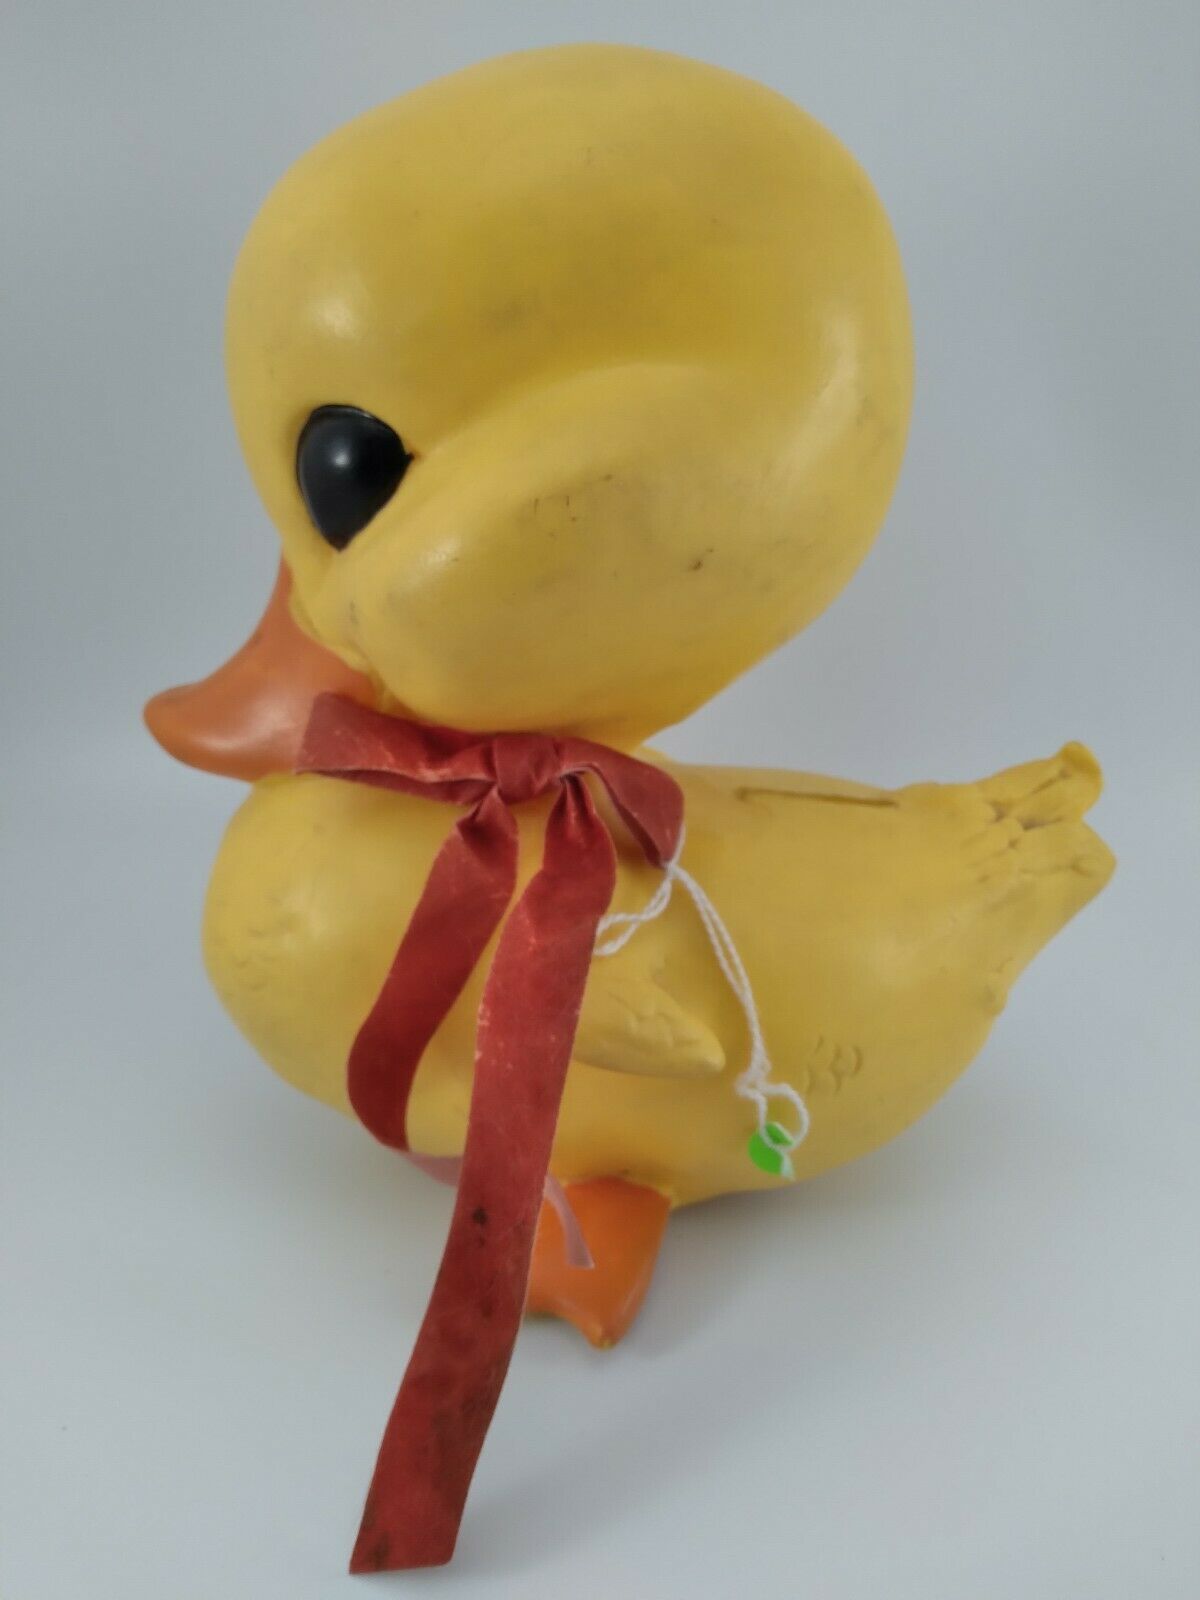 Rubber duck Royalty Industries Vintage 1971 Duck Bank Toy Plastic On Wheels (B2)